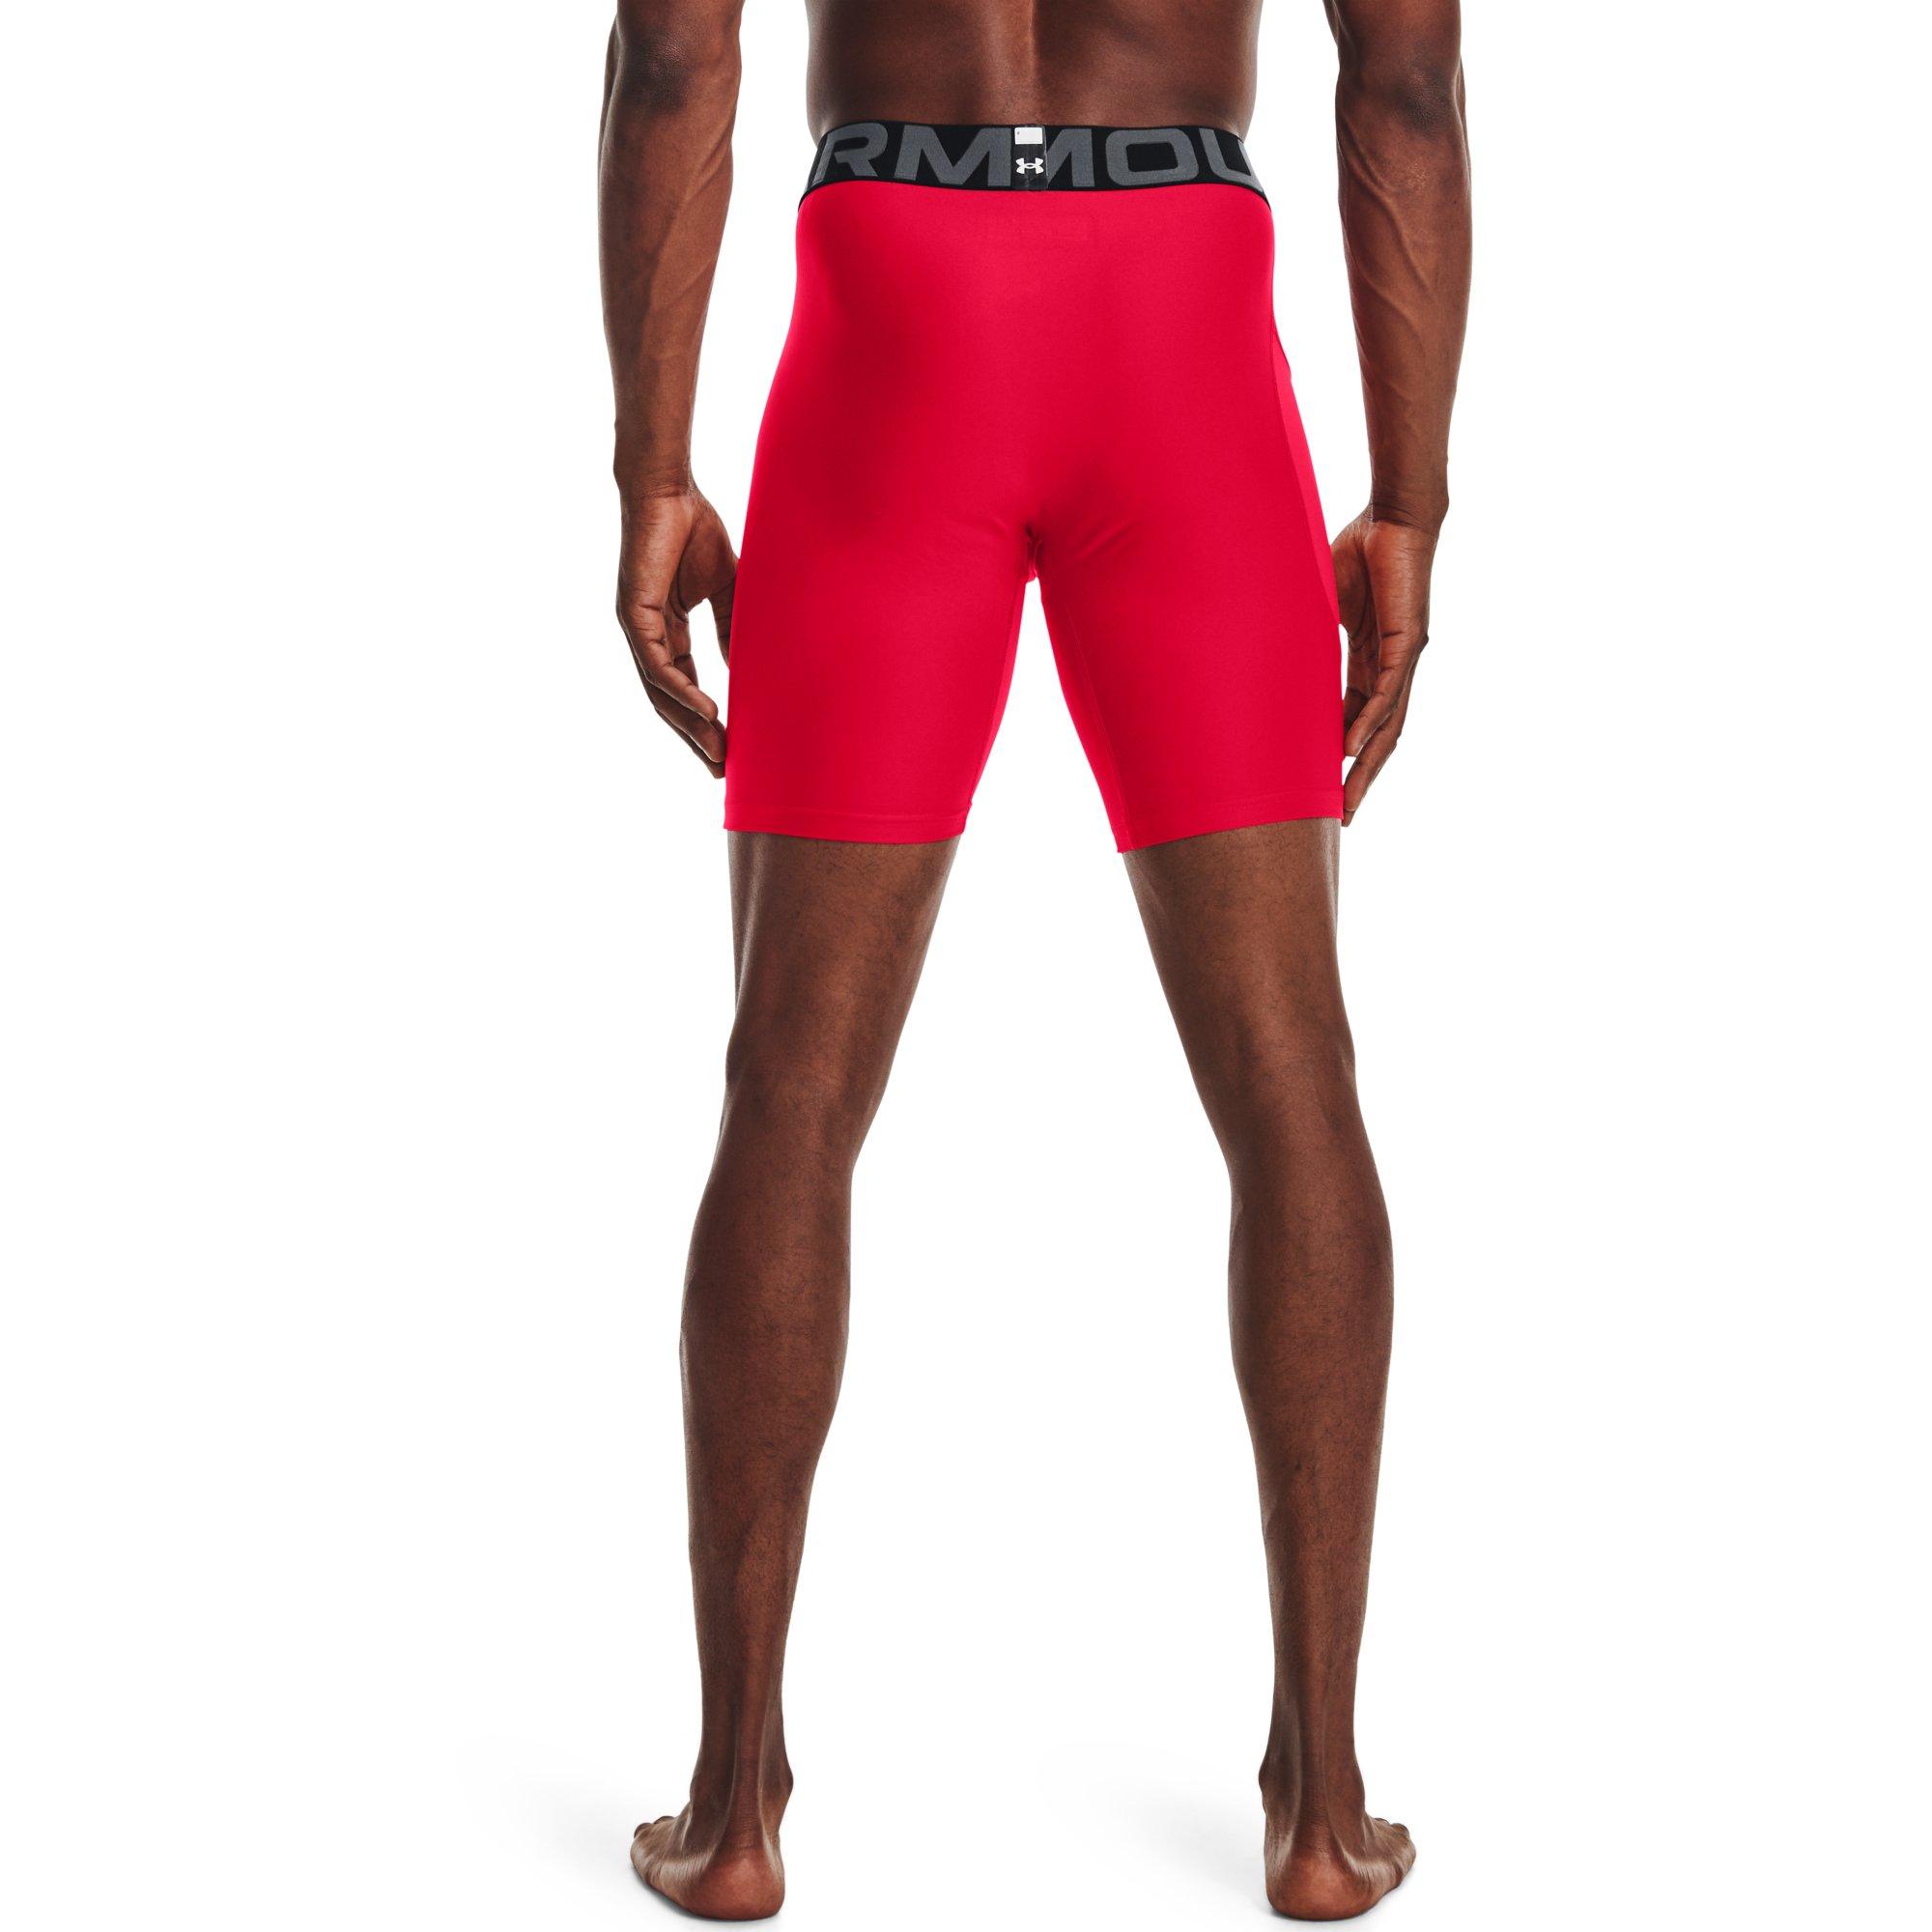 NWT Neon Pink Under Armour Spandex Shorts  Under armour spandex shorts,  Spandex shorts, Clothes design